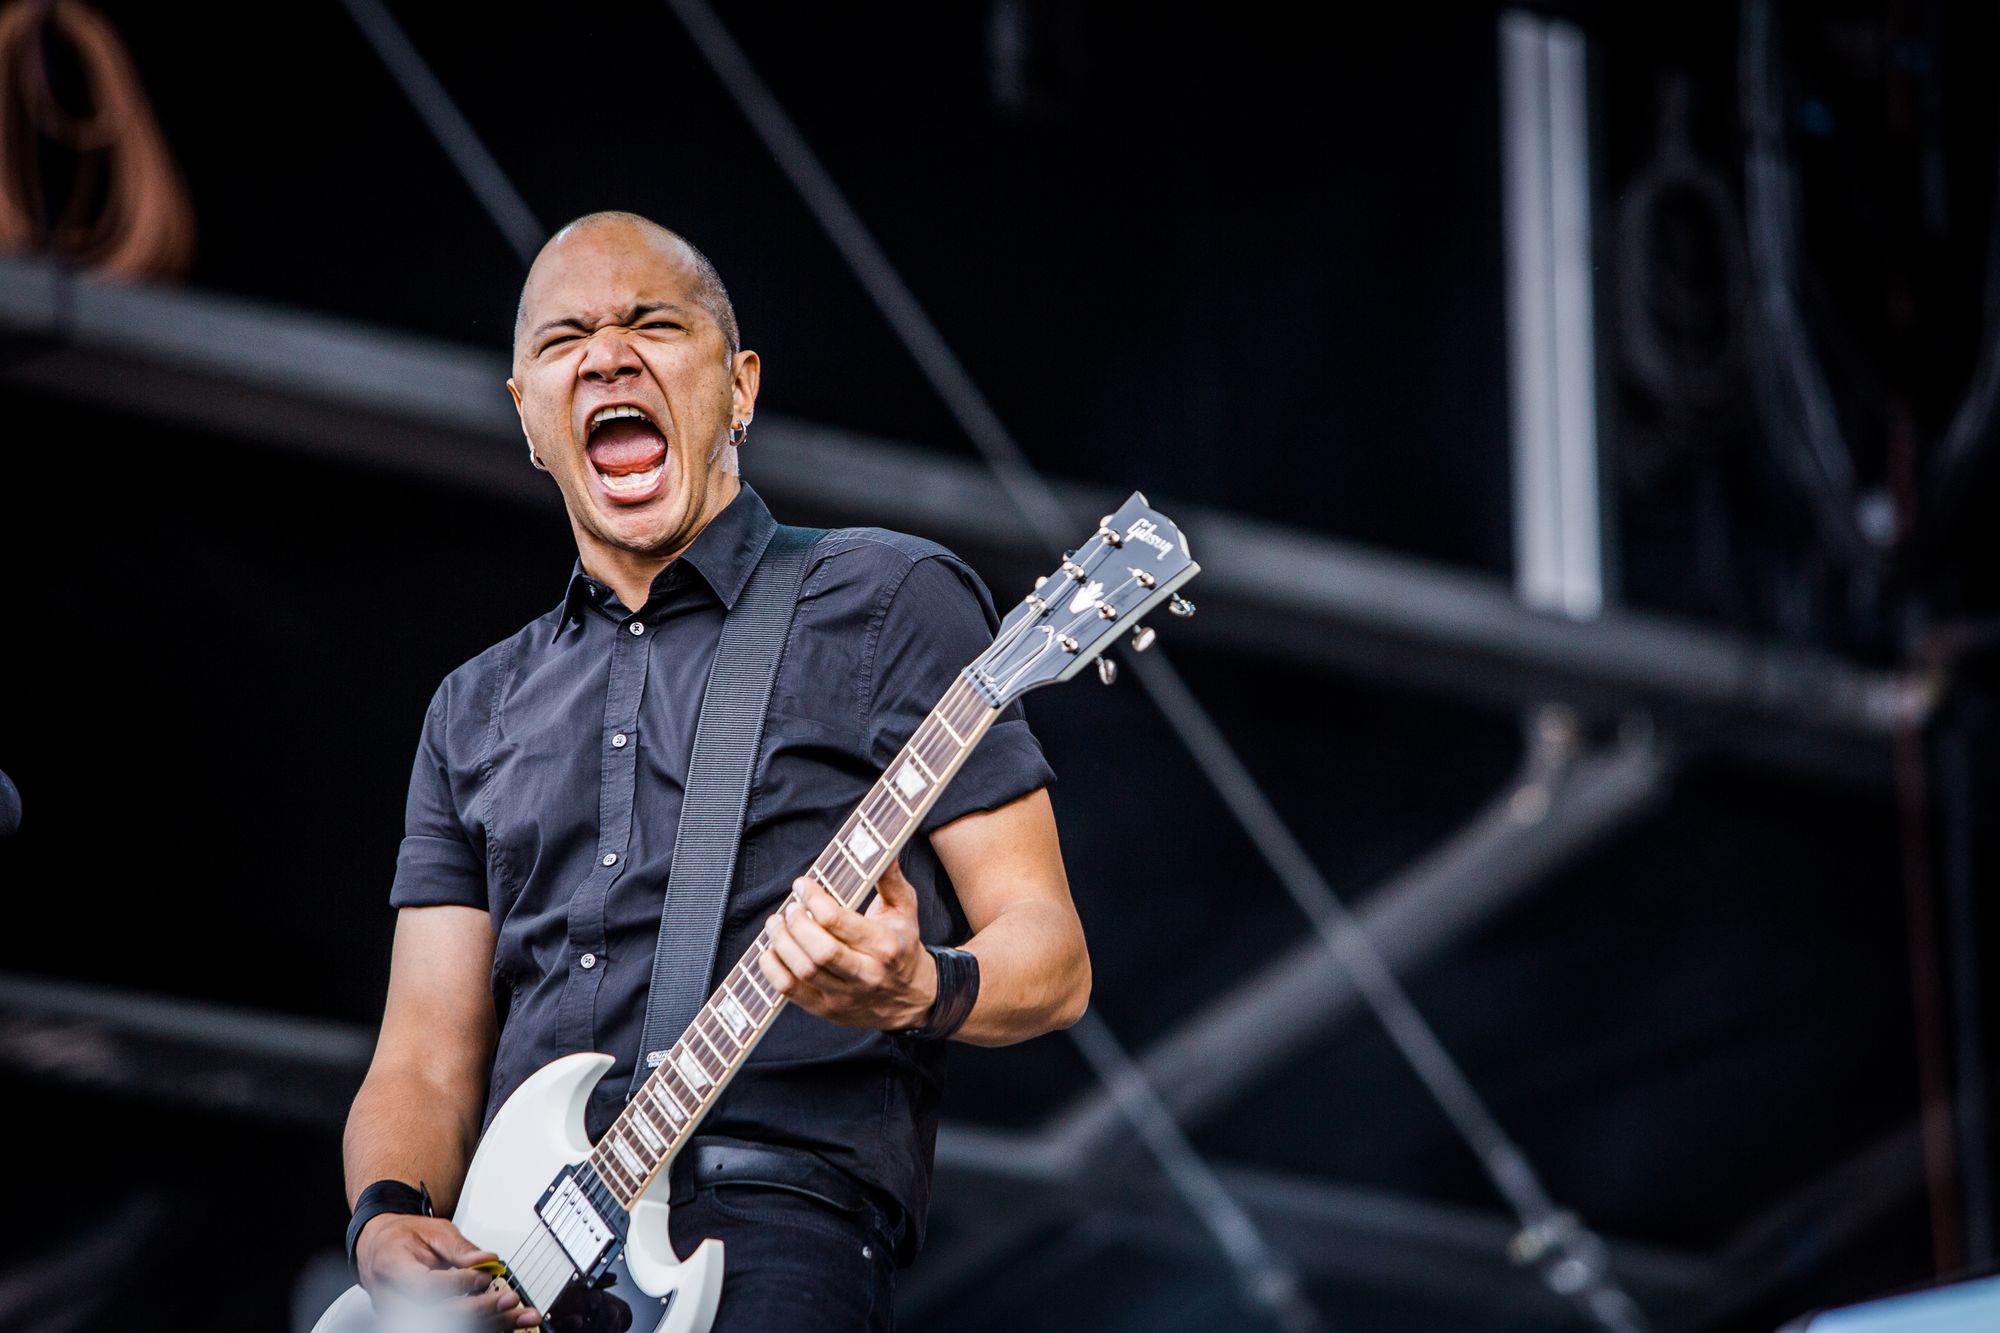 Danko Jones Talks About Catchy Riffs And The Sound Of Silence